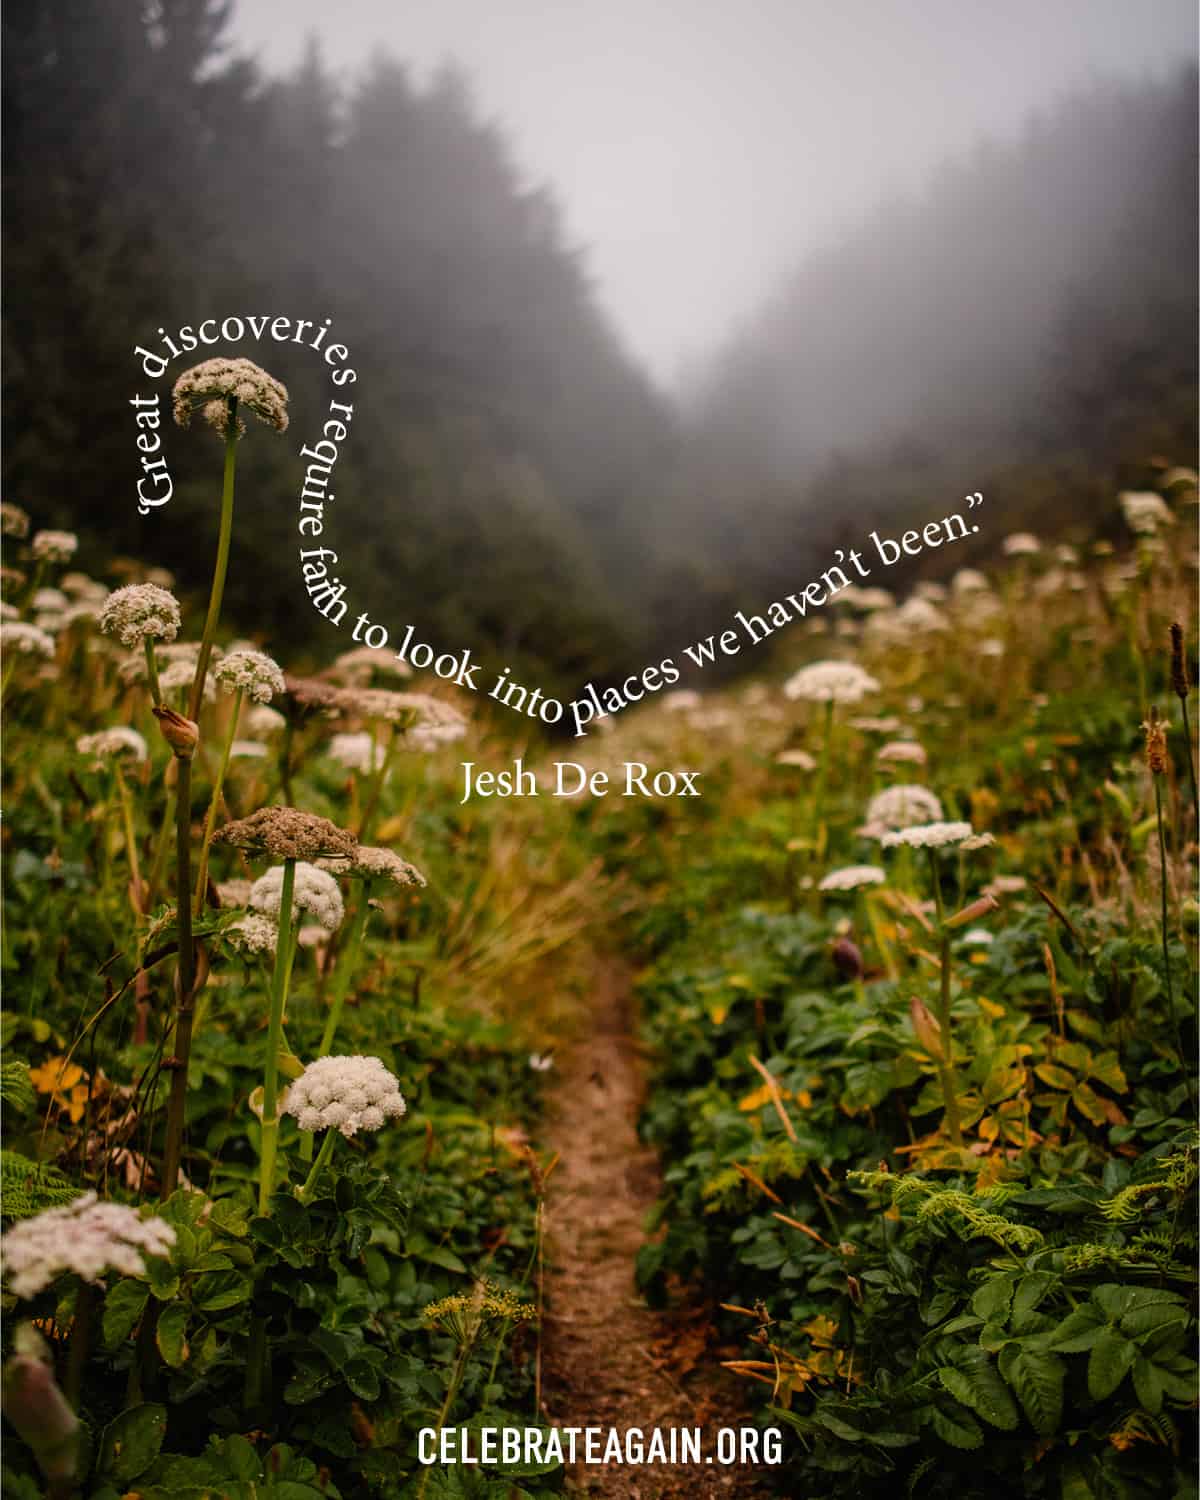 a self love quote saying “Great discoveries require faith to look into places we haven’t been.” Jesh De Rox over a photo of a small trail leading into fog